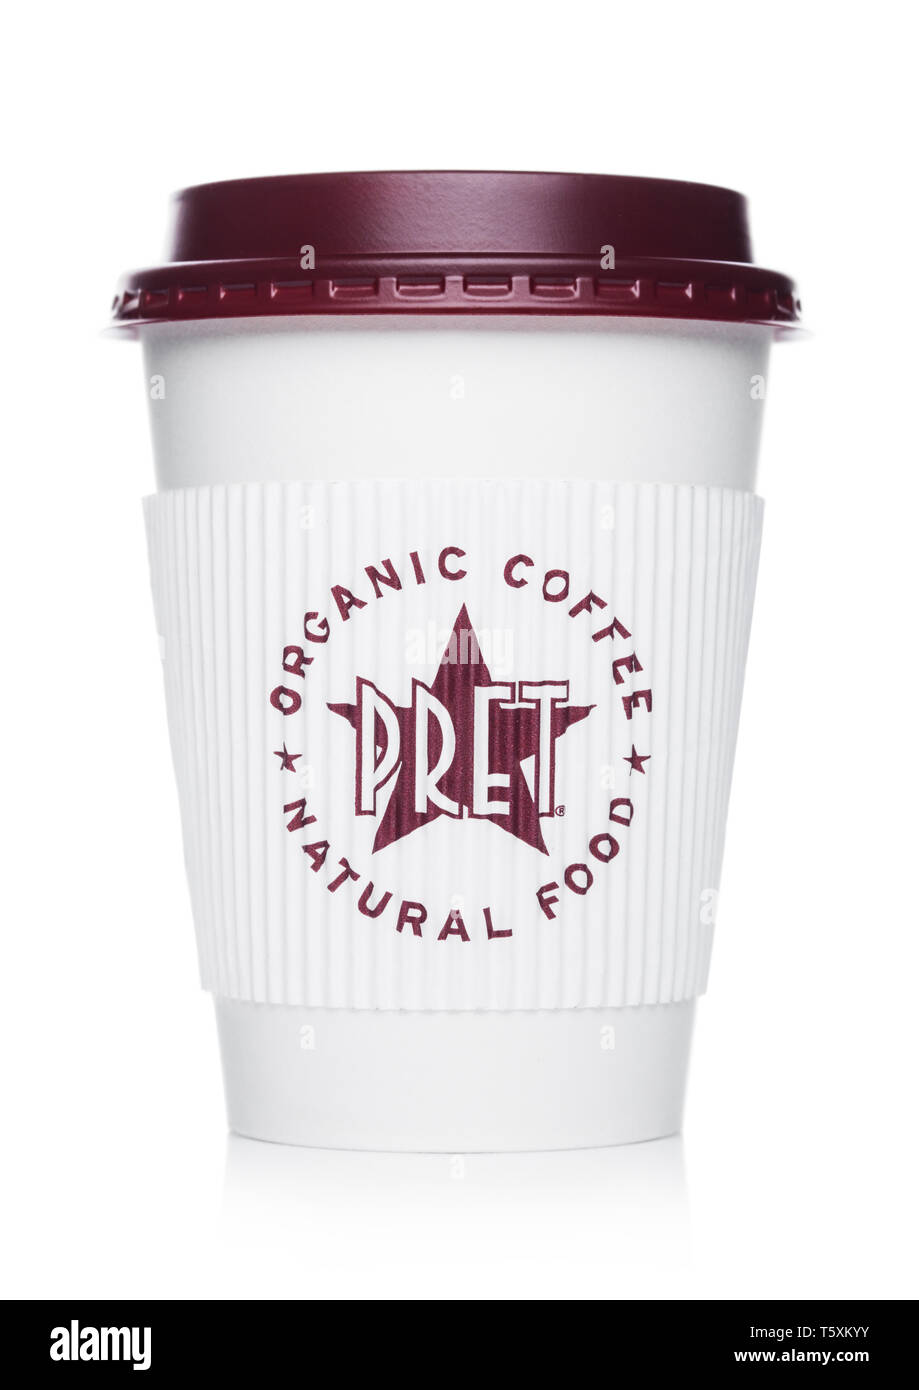 LONDON, UK - APRIL 15, 2019: Pret a Manger Coffee Paper Cup from the famous coffee shop chain with logo in the middle on white. Stock Photo